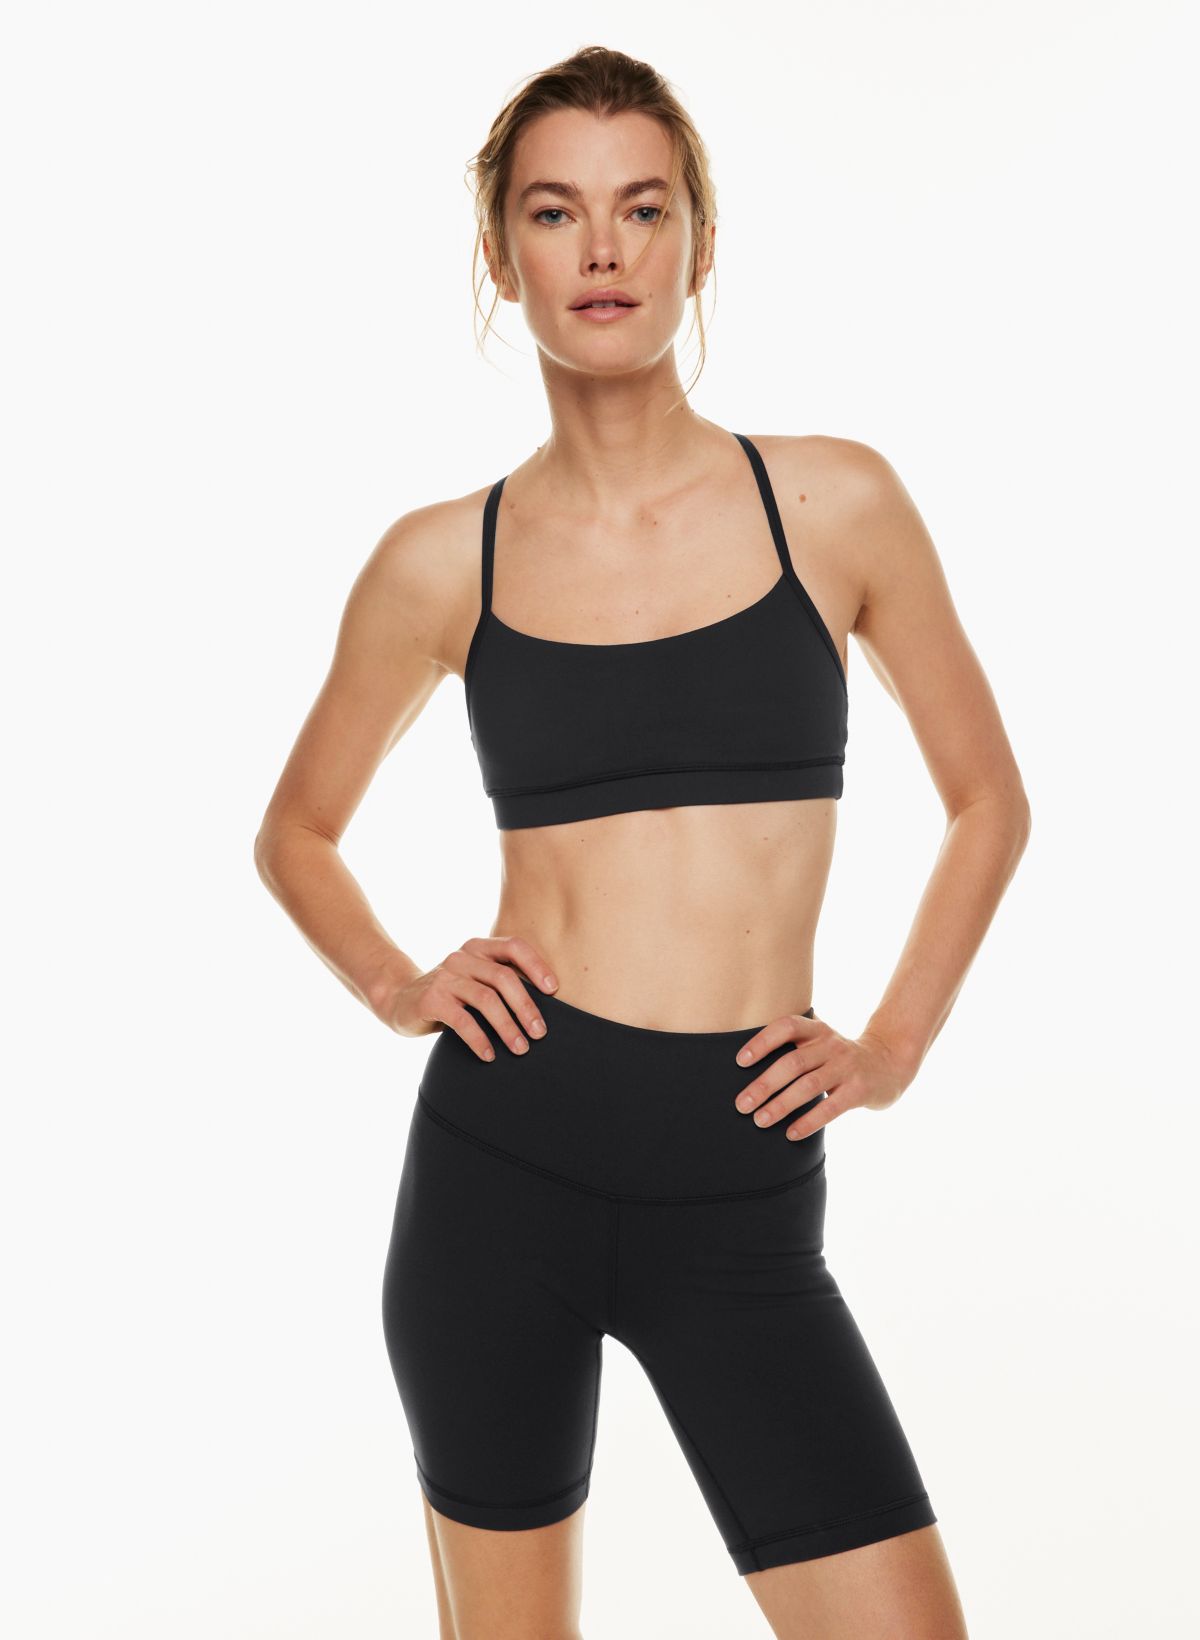 Achieve your fitness goals in style with Riza Sports Bra. Its